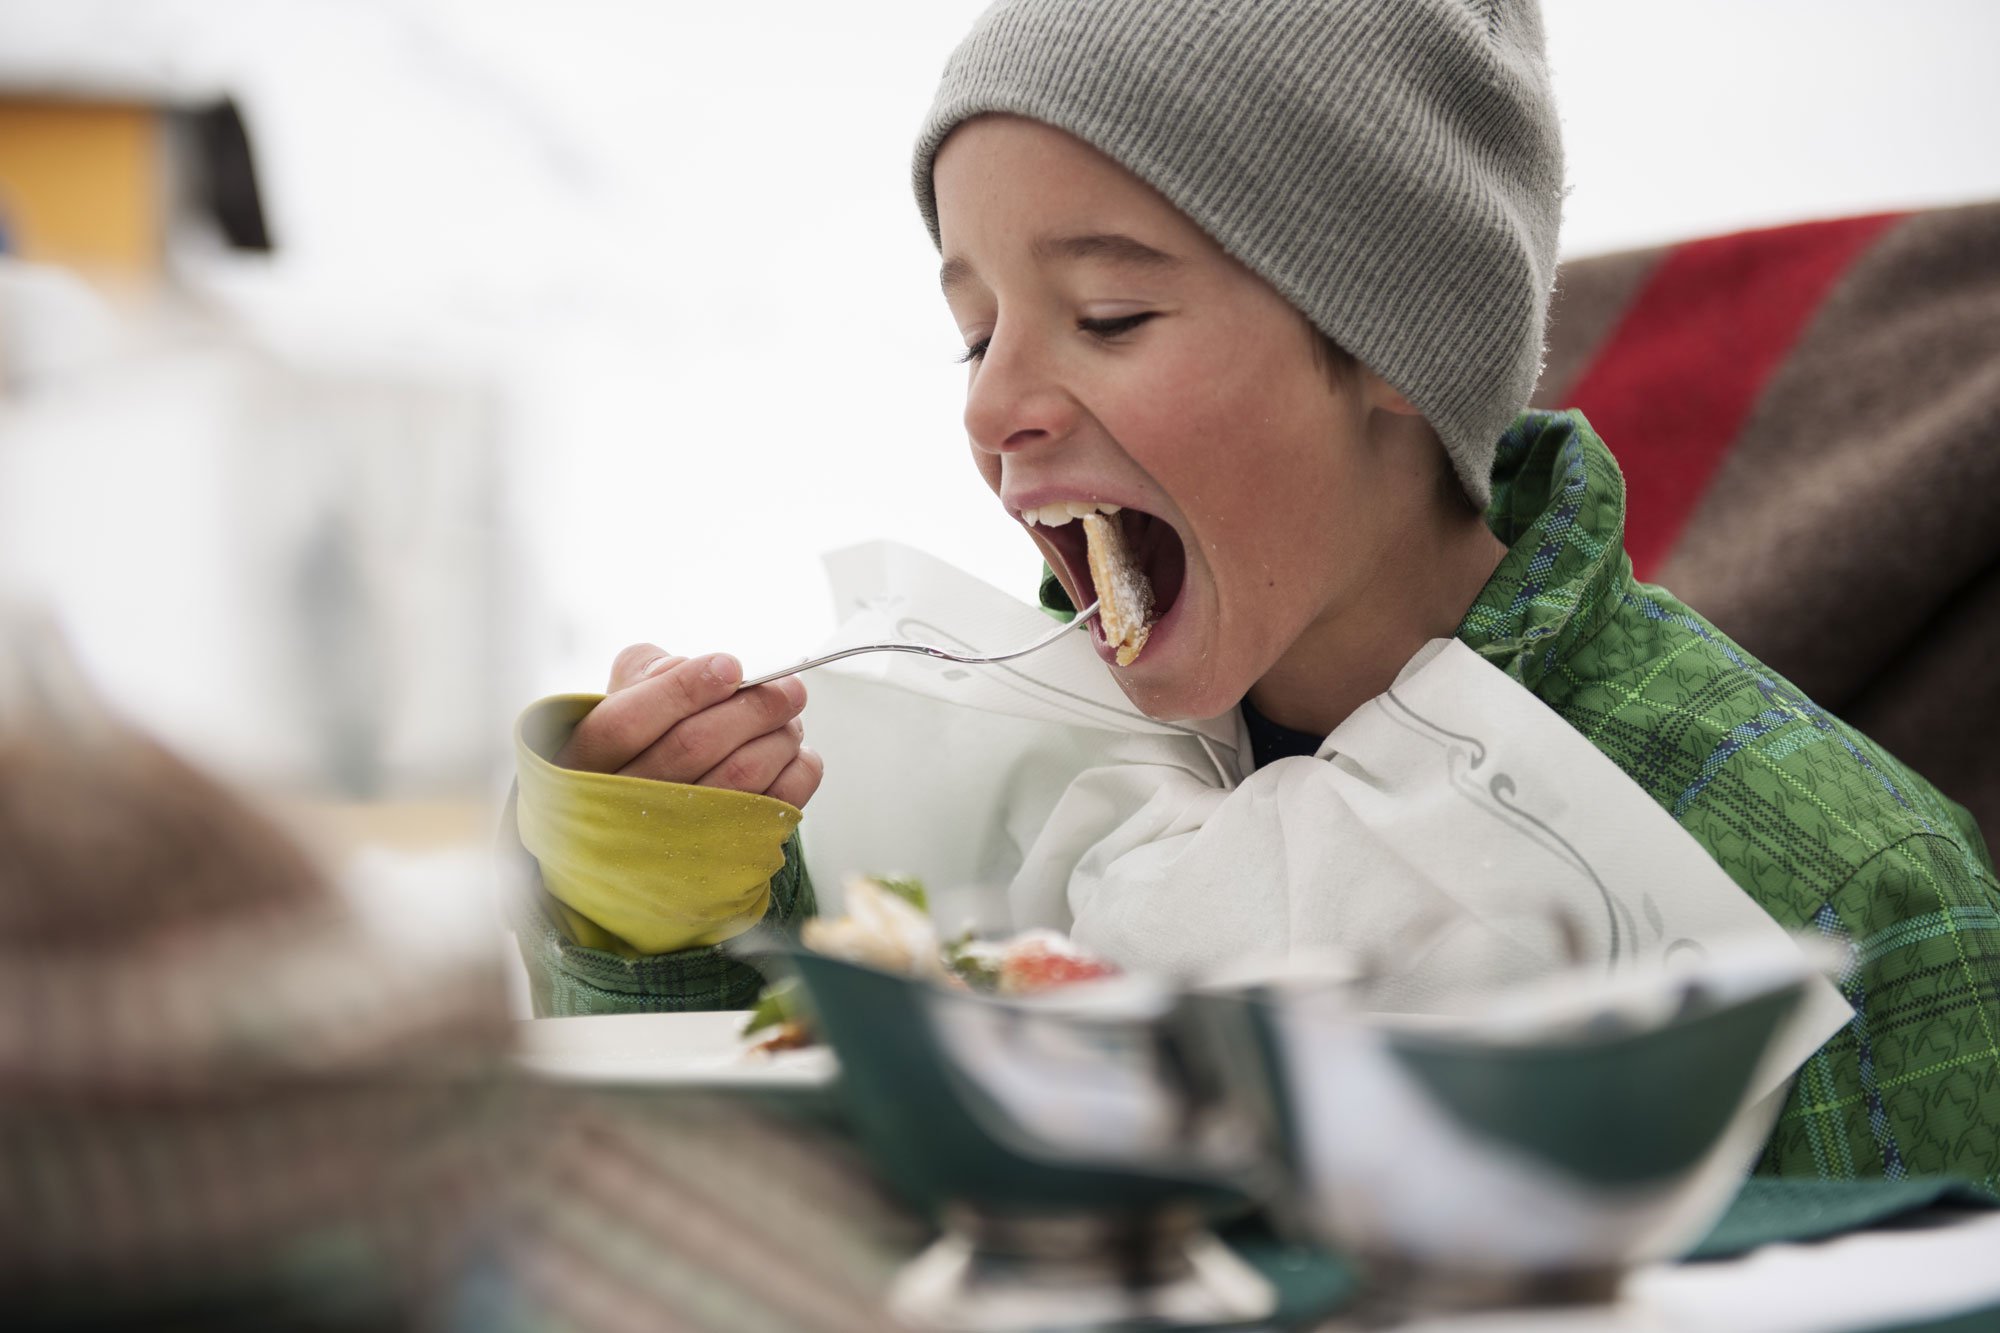 Skiing makes hungry. A young winter sportsmen enjoys his 